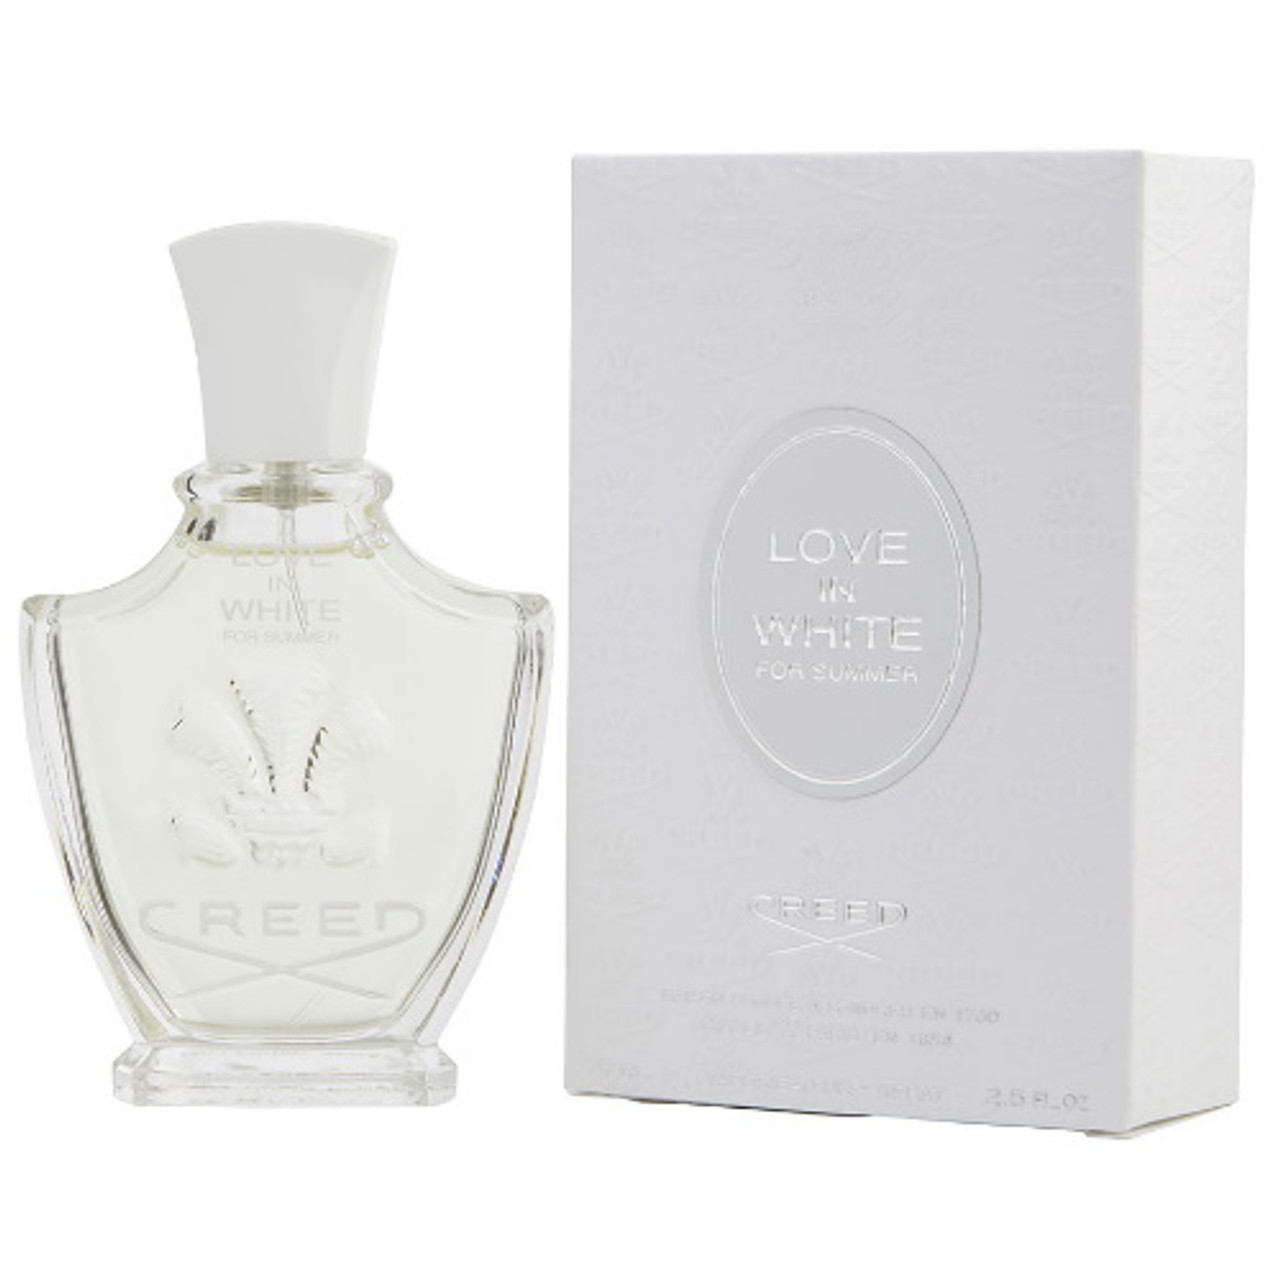 Creed Love in White women oz 2.5 EDP Summer for by - for Creed ForeverLux